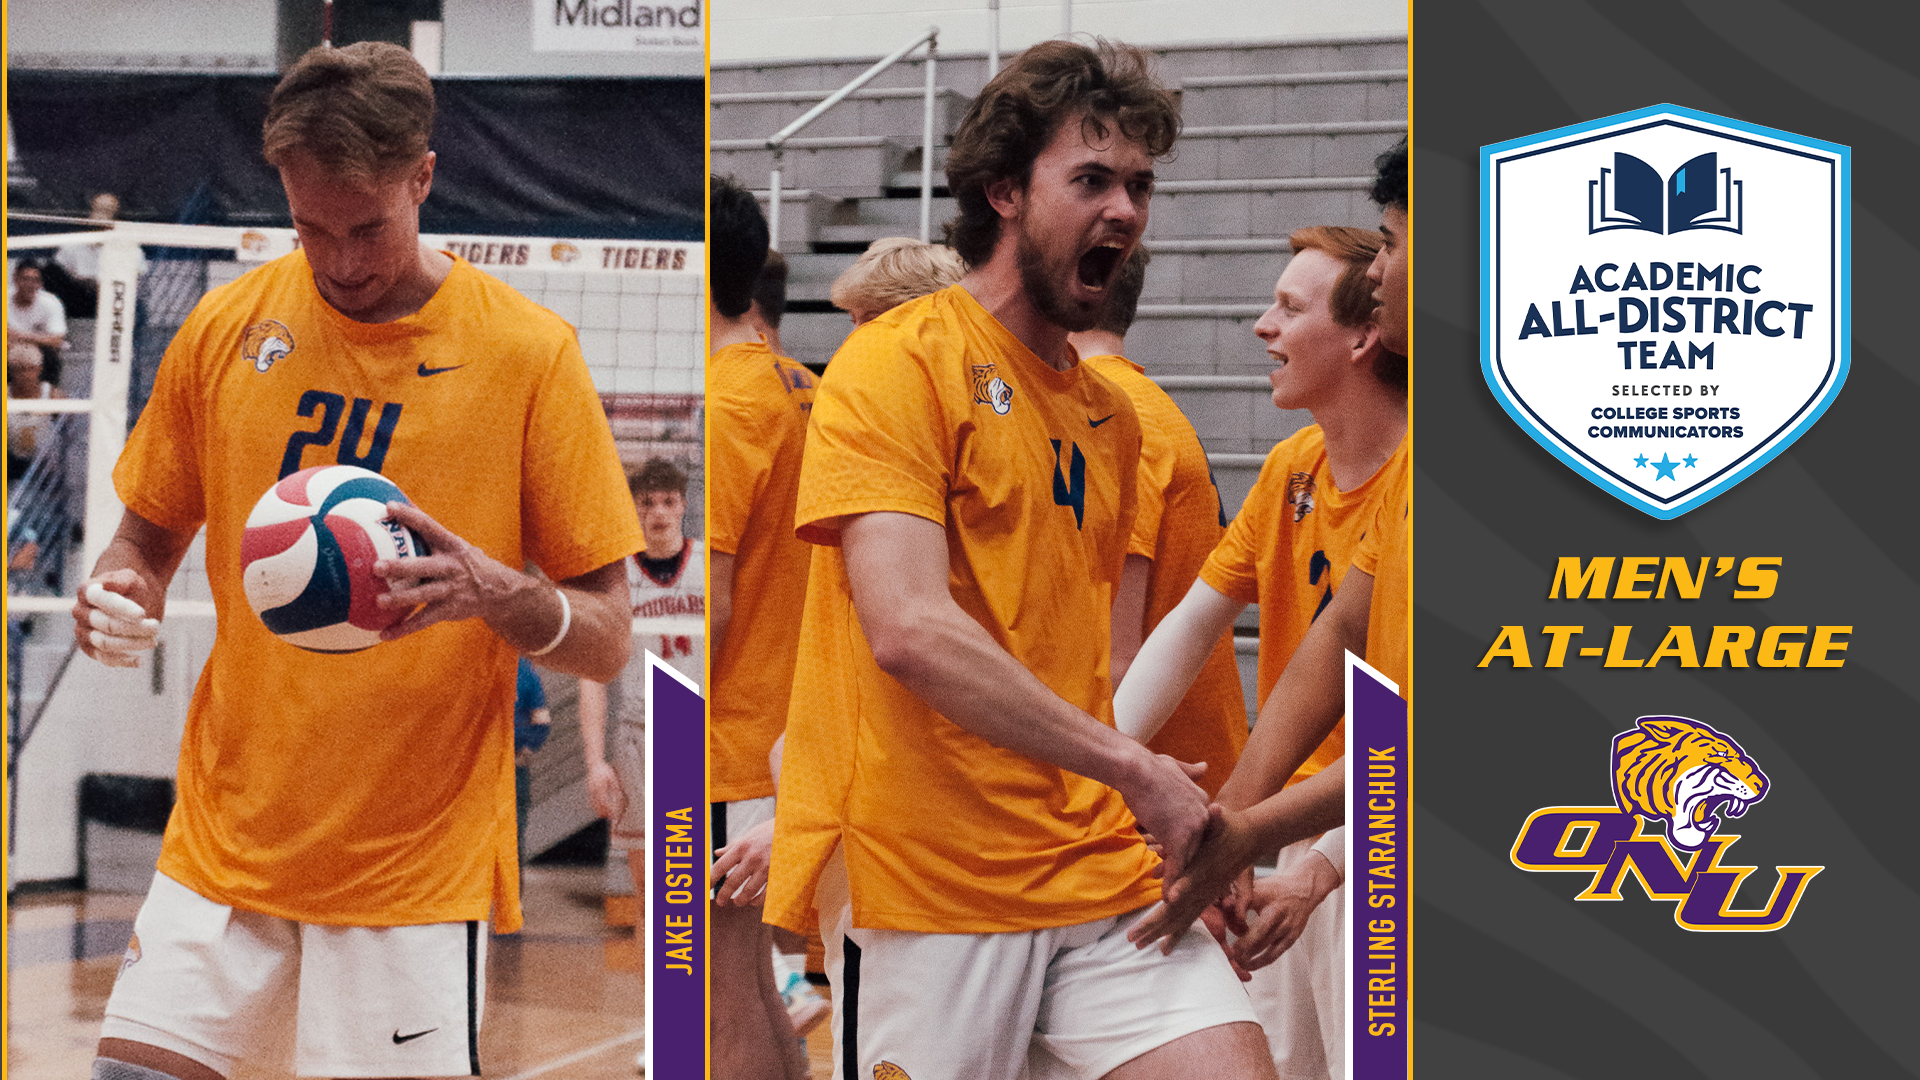 OSTEMA, STARANCHUK NAMED TO ACADEMIC ALL-DISTRICT MEN’S AT-LARGE TEAM